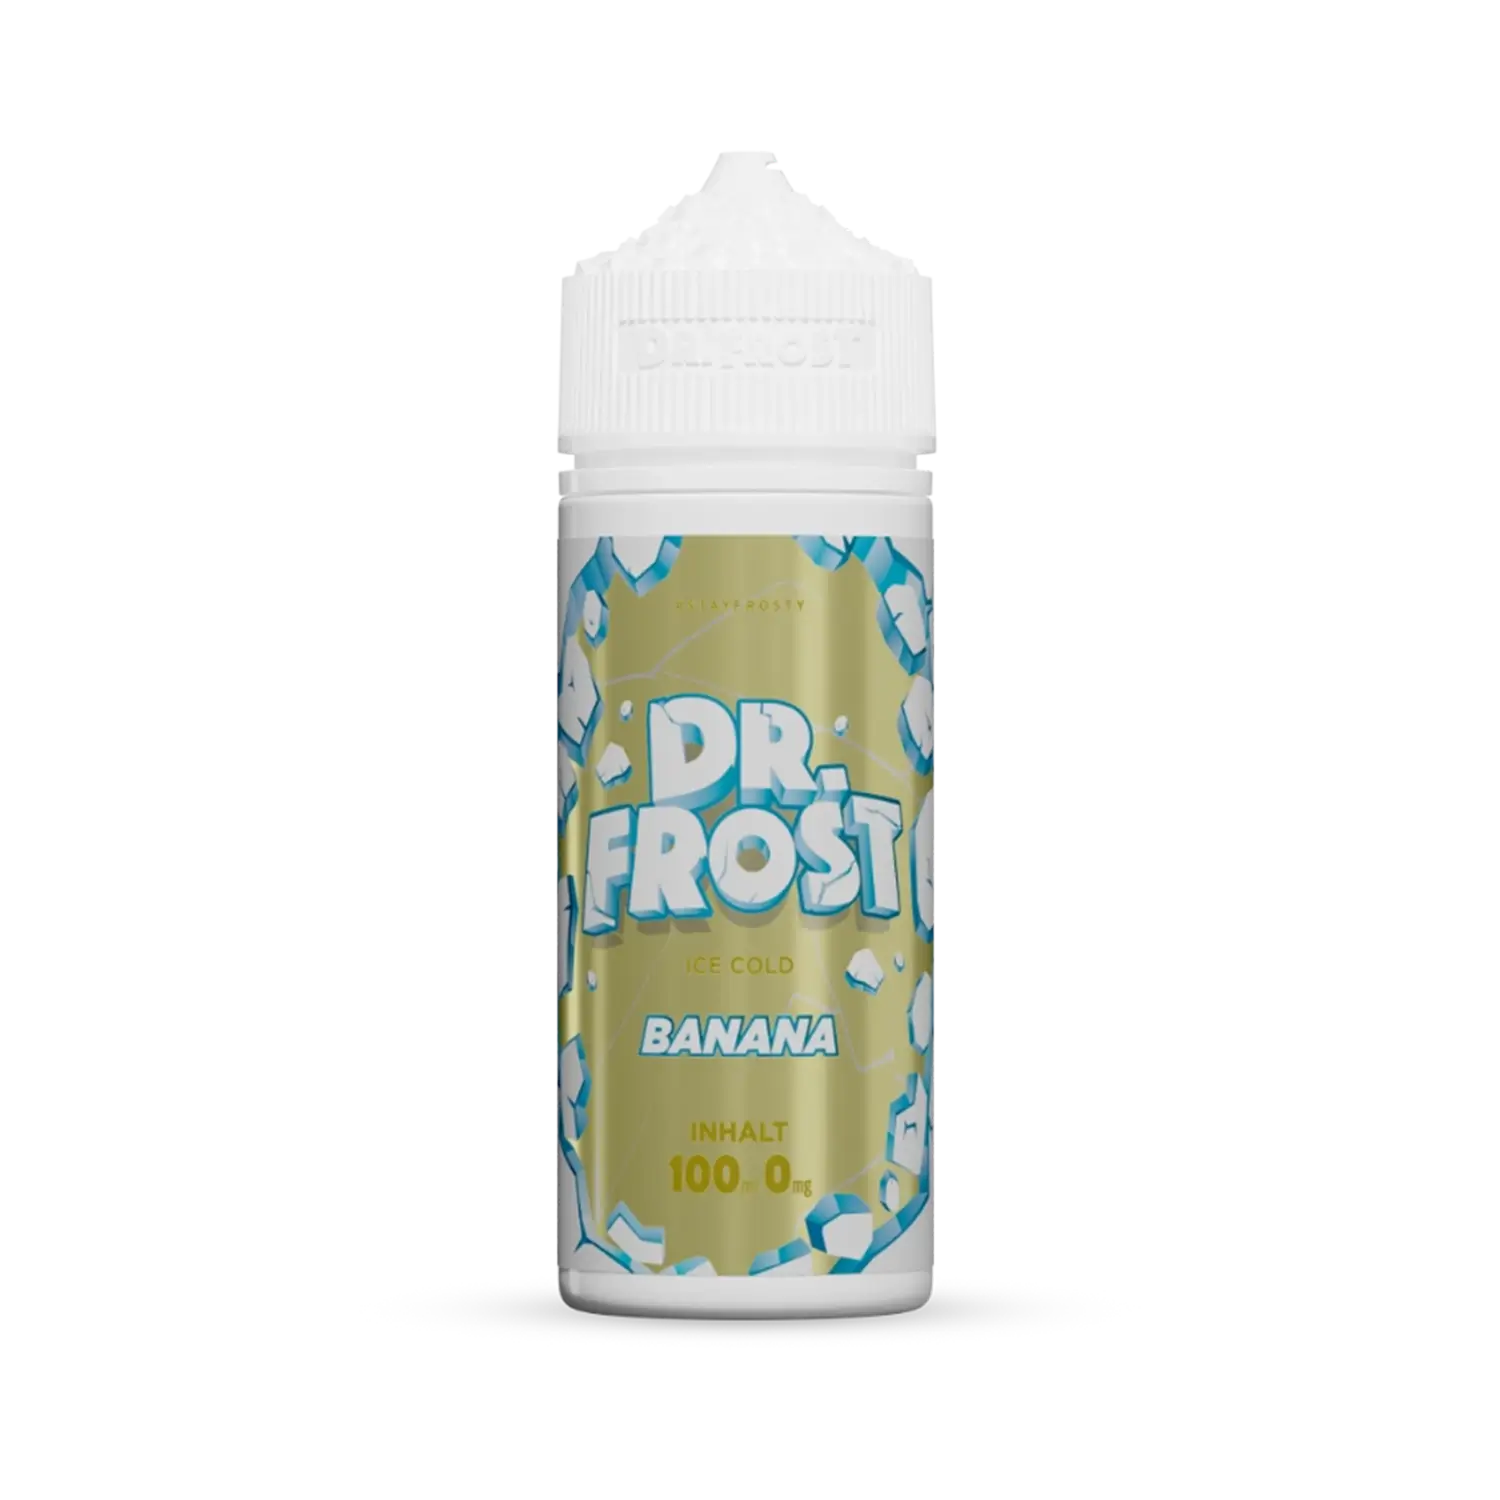 Dr. Frost - Ice Cold - Banana 100 ml Liquid